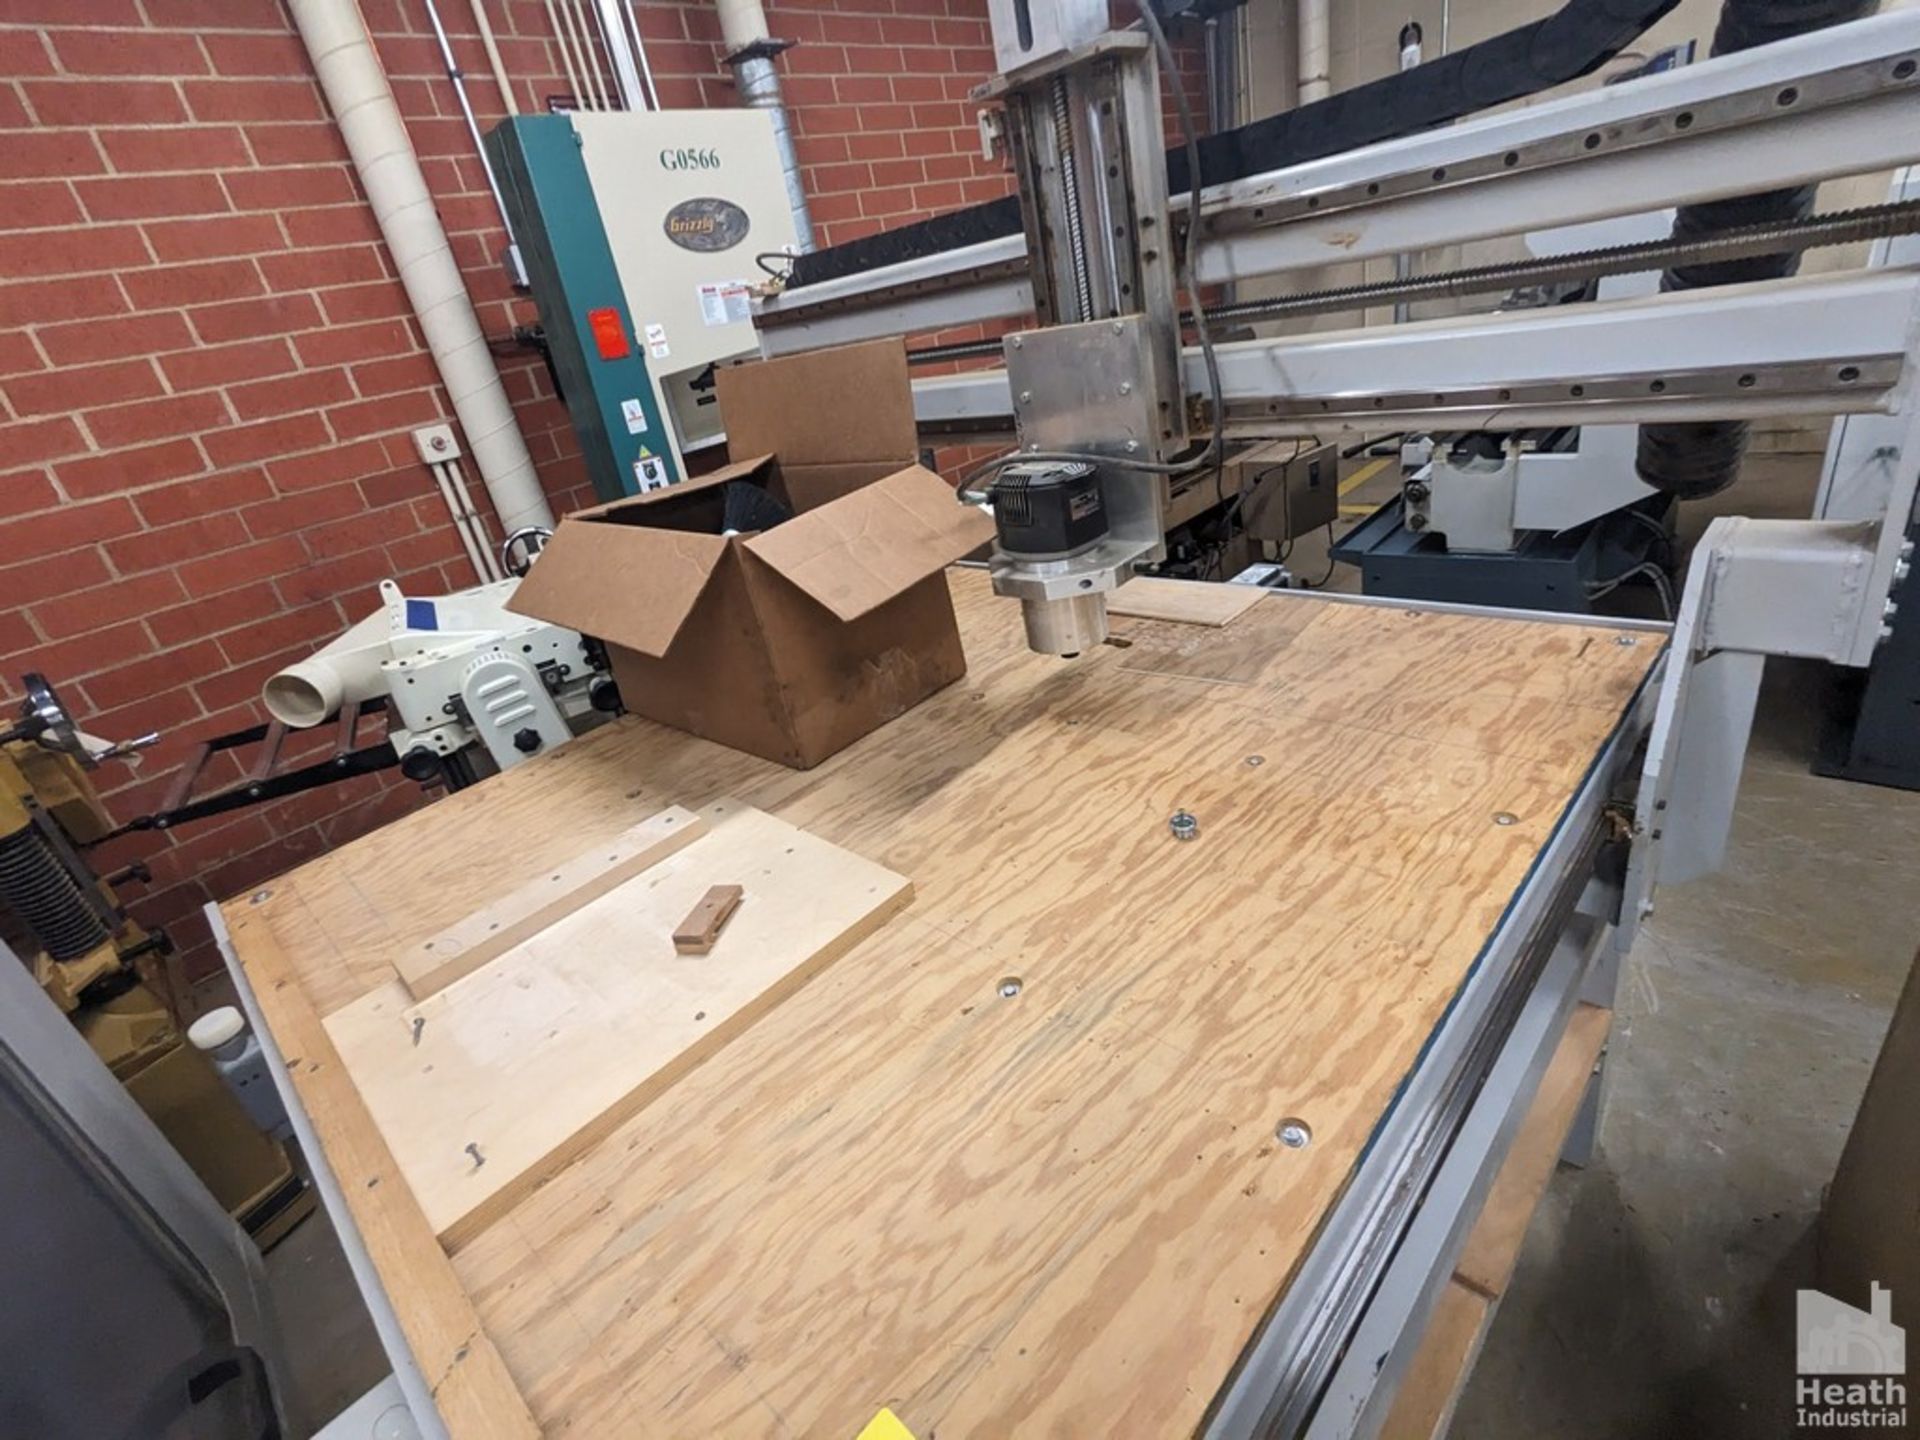 SABRE MODEL 3636 CNC WOOD ROUTER WITH PORTABLE TABLE Loading Fee :$100 - Image 5 of 5